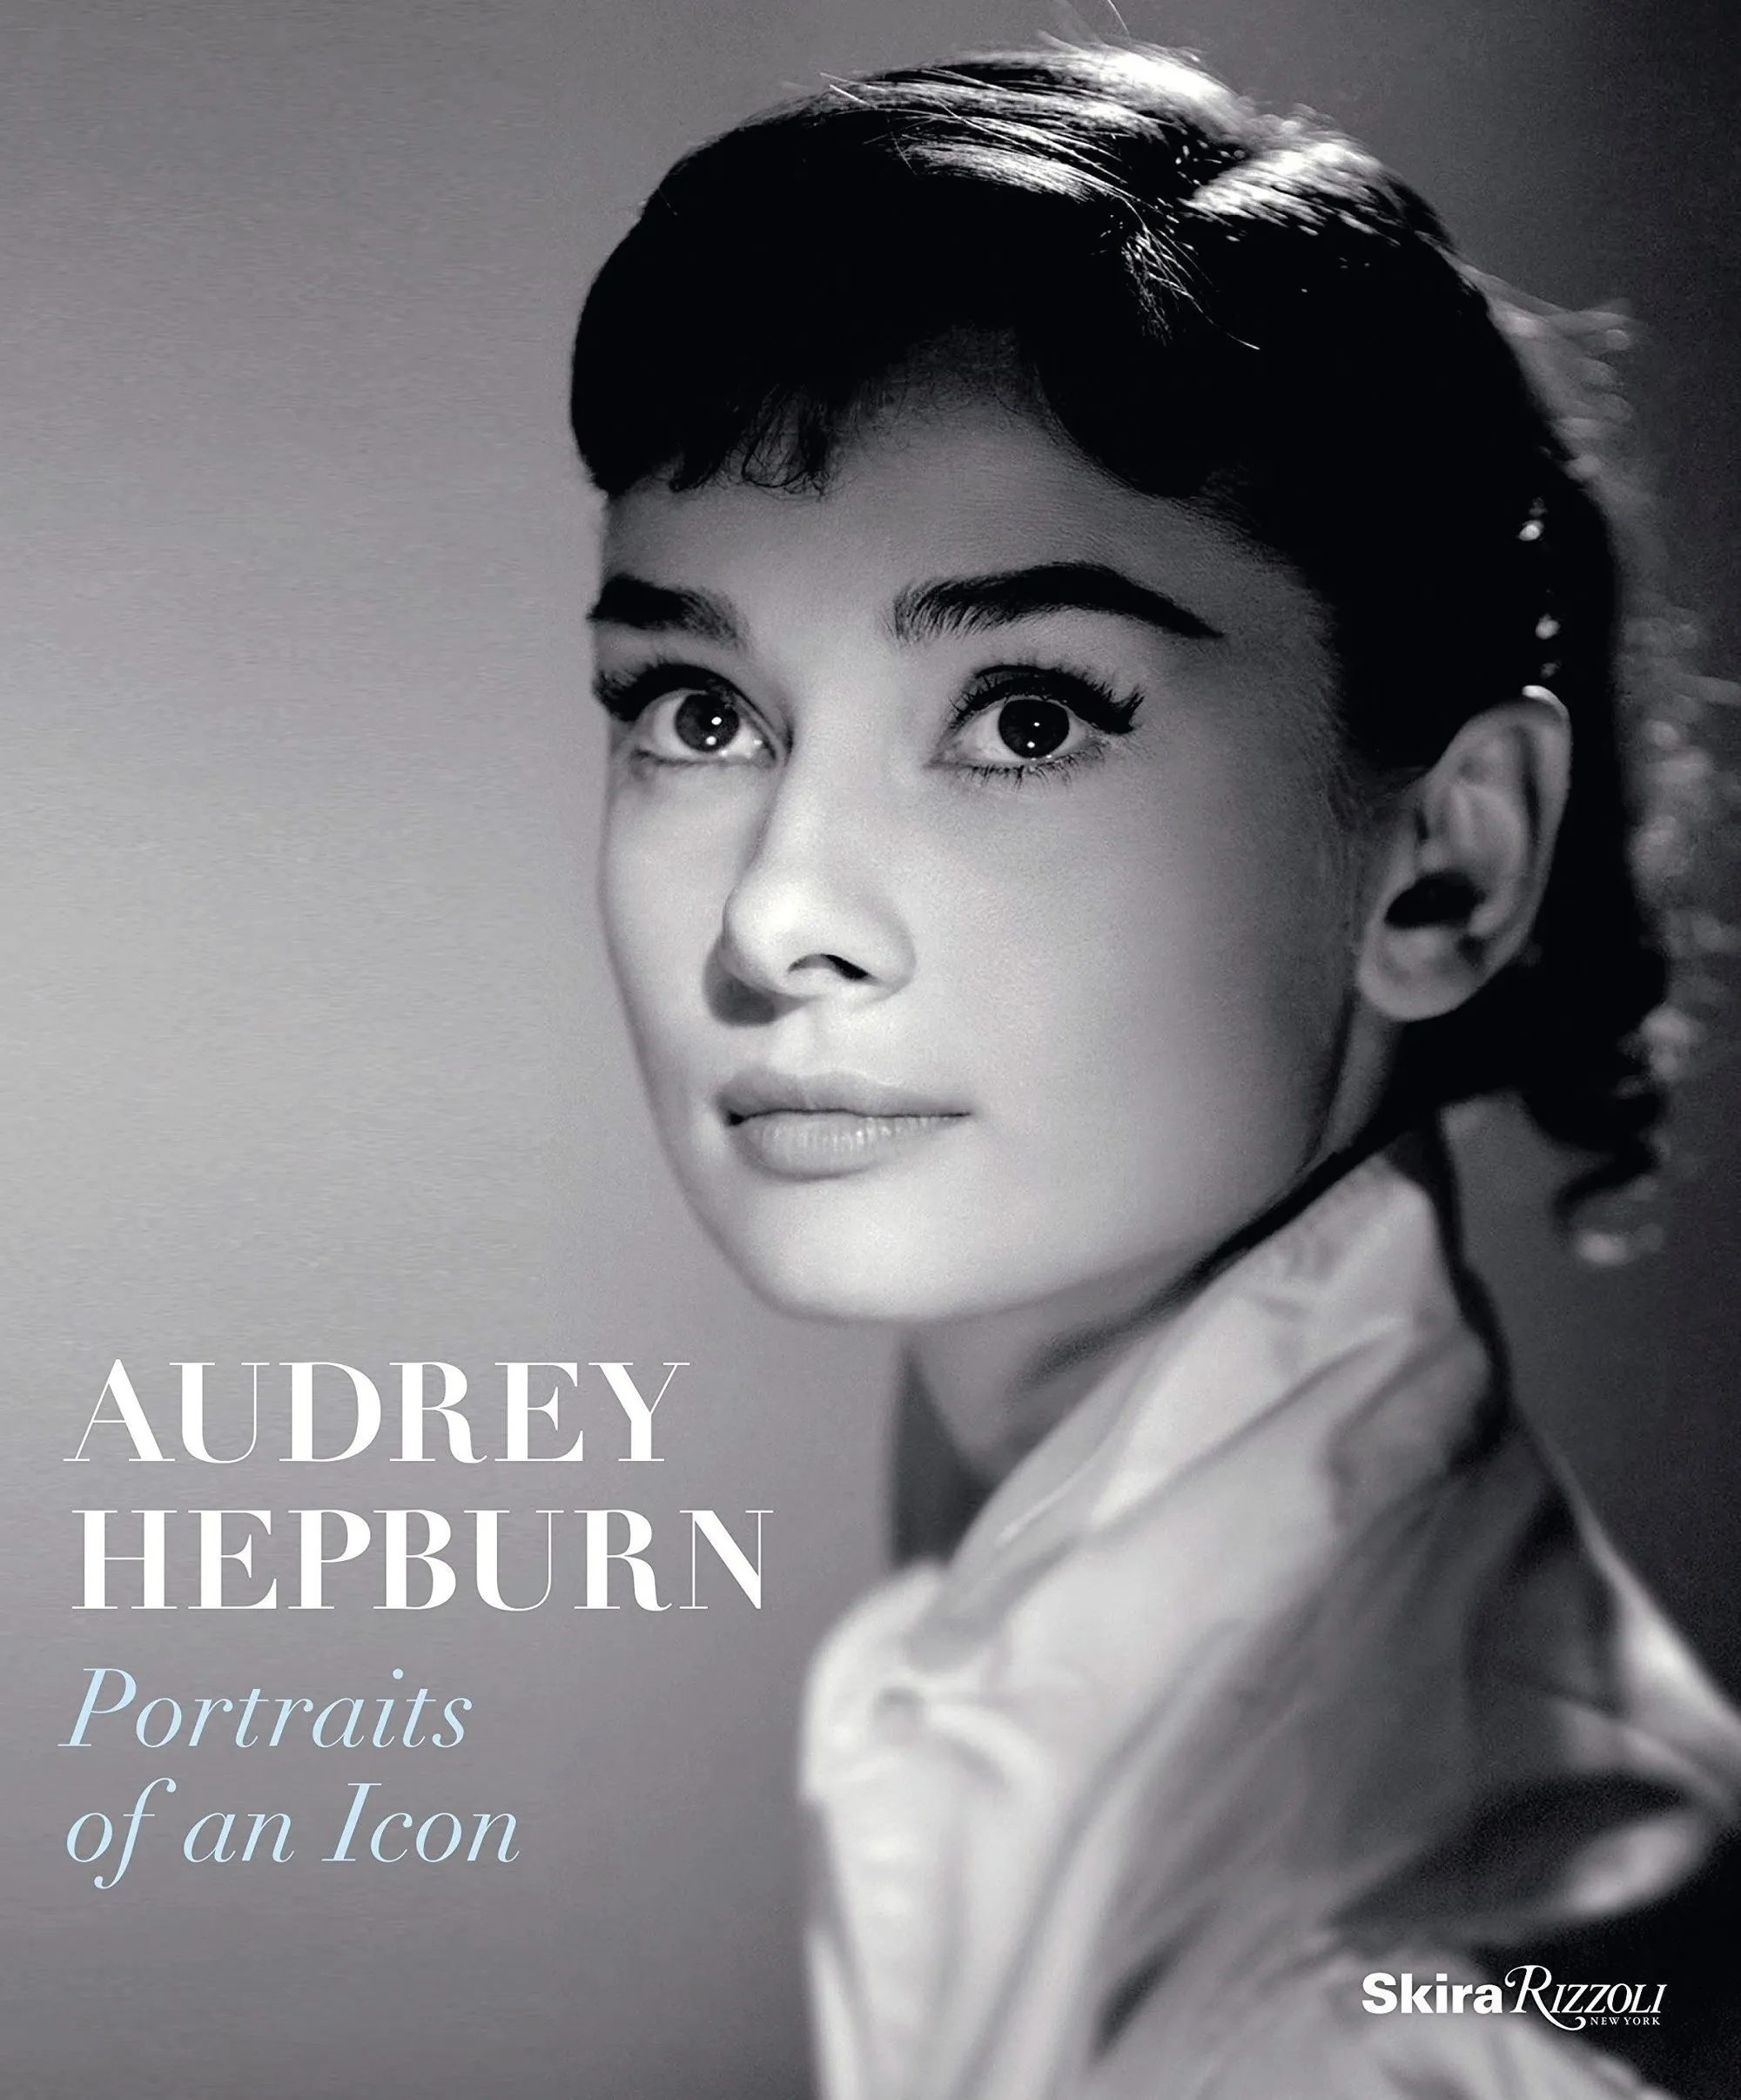 Audrey Hepburn: Portraits of an Icon, Terence Pepper and Helen Trompeteler, 2015